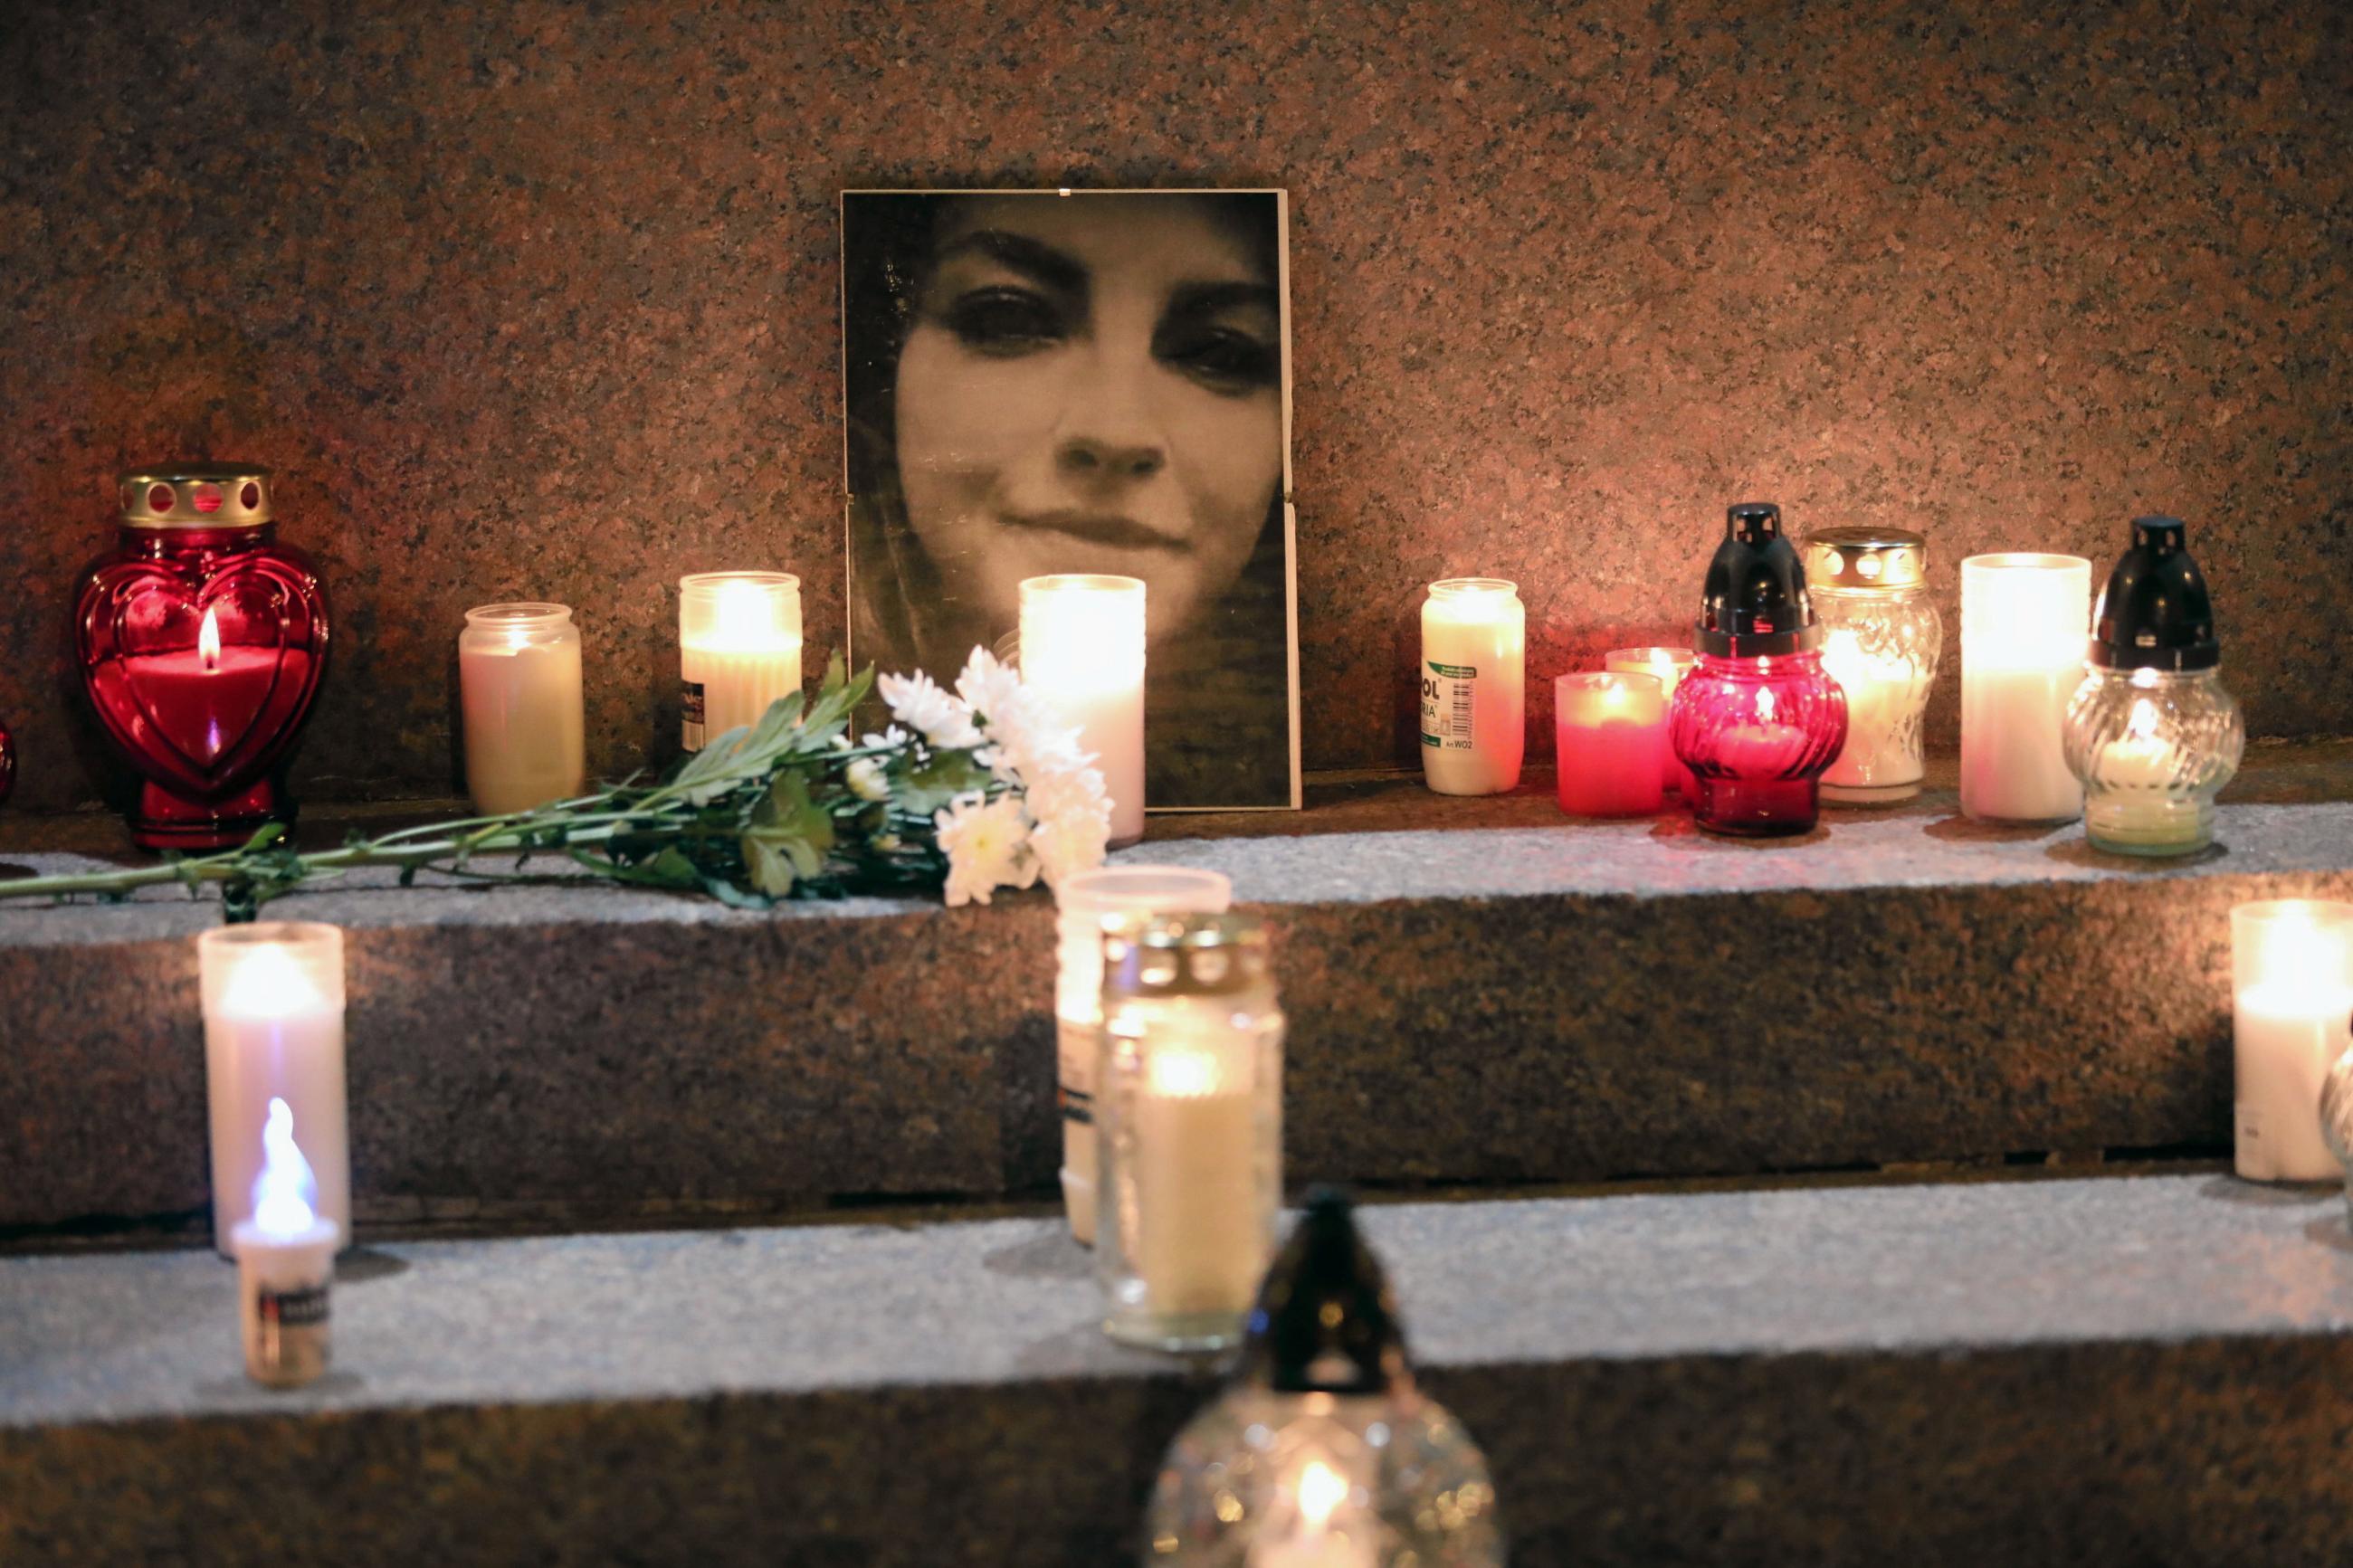 A photo of Izabela, who died due to untreated complications from her pregnancy is leaned against a wall, surrounded by red and white candles in glass holders and white carnations